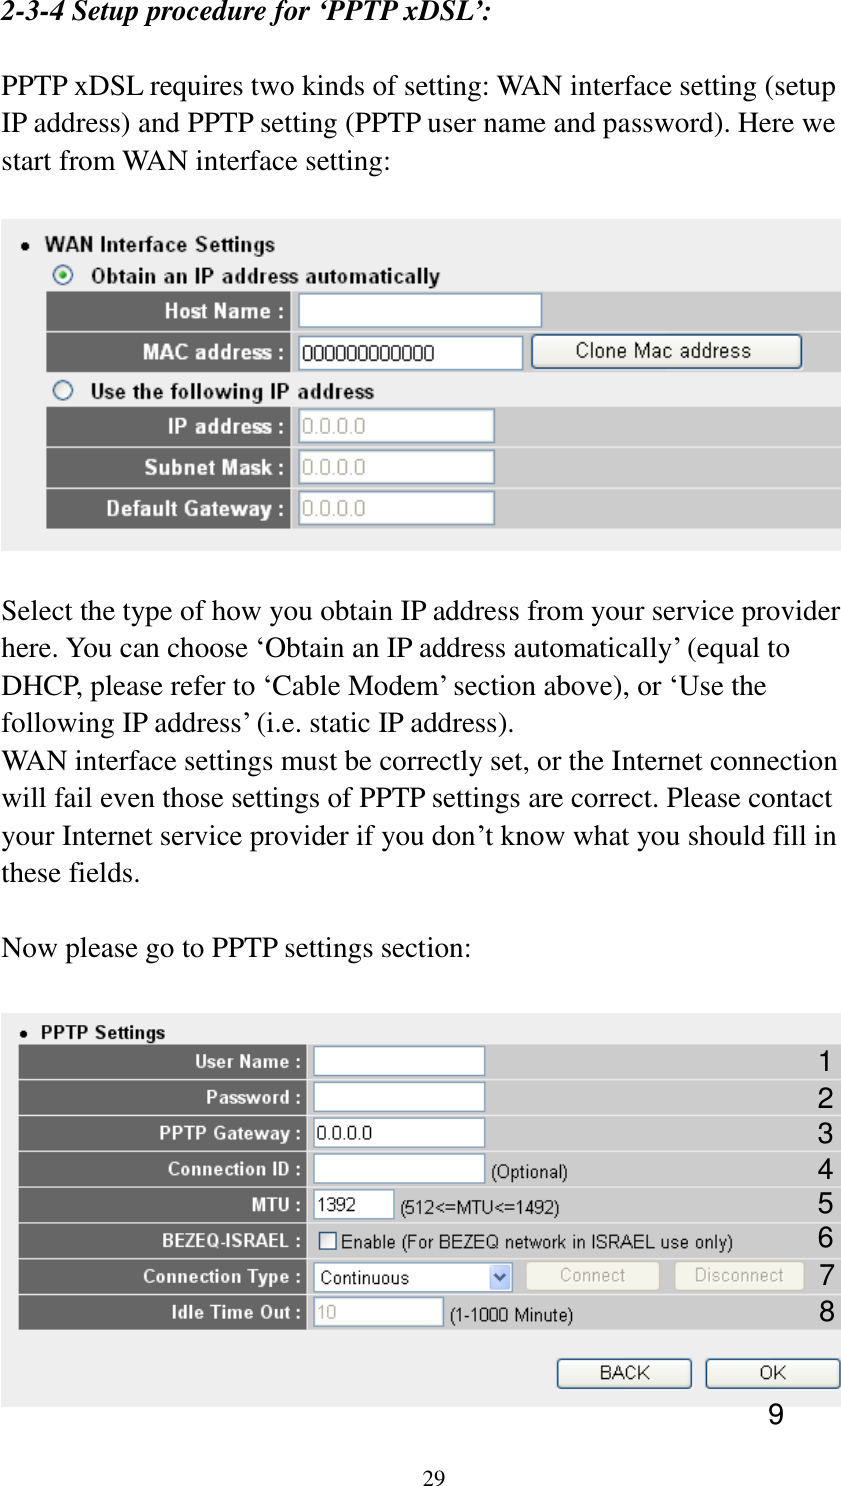 29 2-3-4 Setup procedure for ‘PPTP xDSL’:  PPTP xDSL requires two kinds of setting: WAN interface setting (setup IP address) and PPTP setting (PPTP user name and password). Here we start from WAN interface setting:    Select the type of how you obtain IP address from your service provider here. You can choose „Obtain an IP address automatically‟ (equal to DHCP, please refer to „Cable Modem‟ section above), or „Use the following IP address‟ (i.e. static IP address).   WAN interface settings must be correctly set, or the Internet connection will fail even those settings of PPTP settings are correct. Please contact your Internet service provider if you don‟t know what you should fill in these fields.  Now please go to PPTP settings section:   1 2 3 4 5 6 7 9 8 